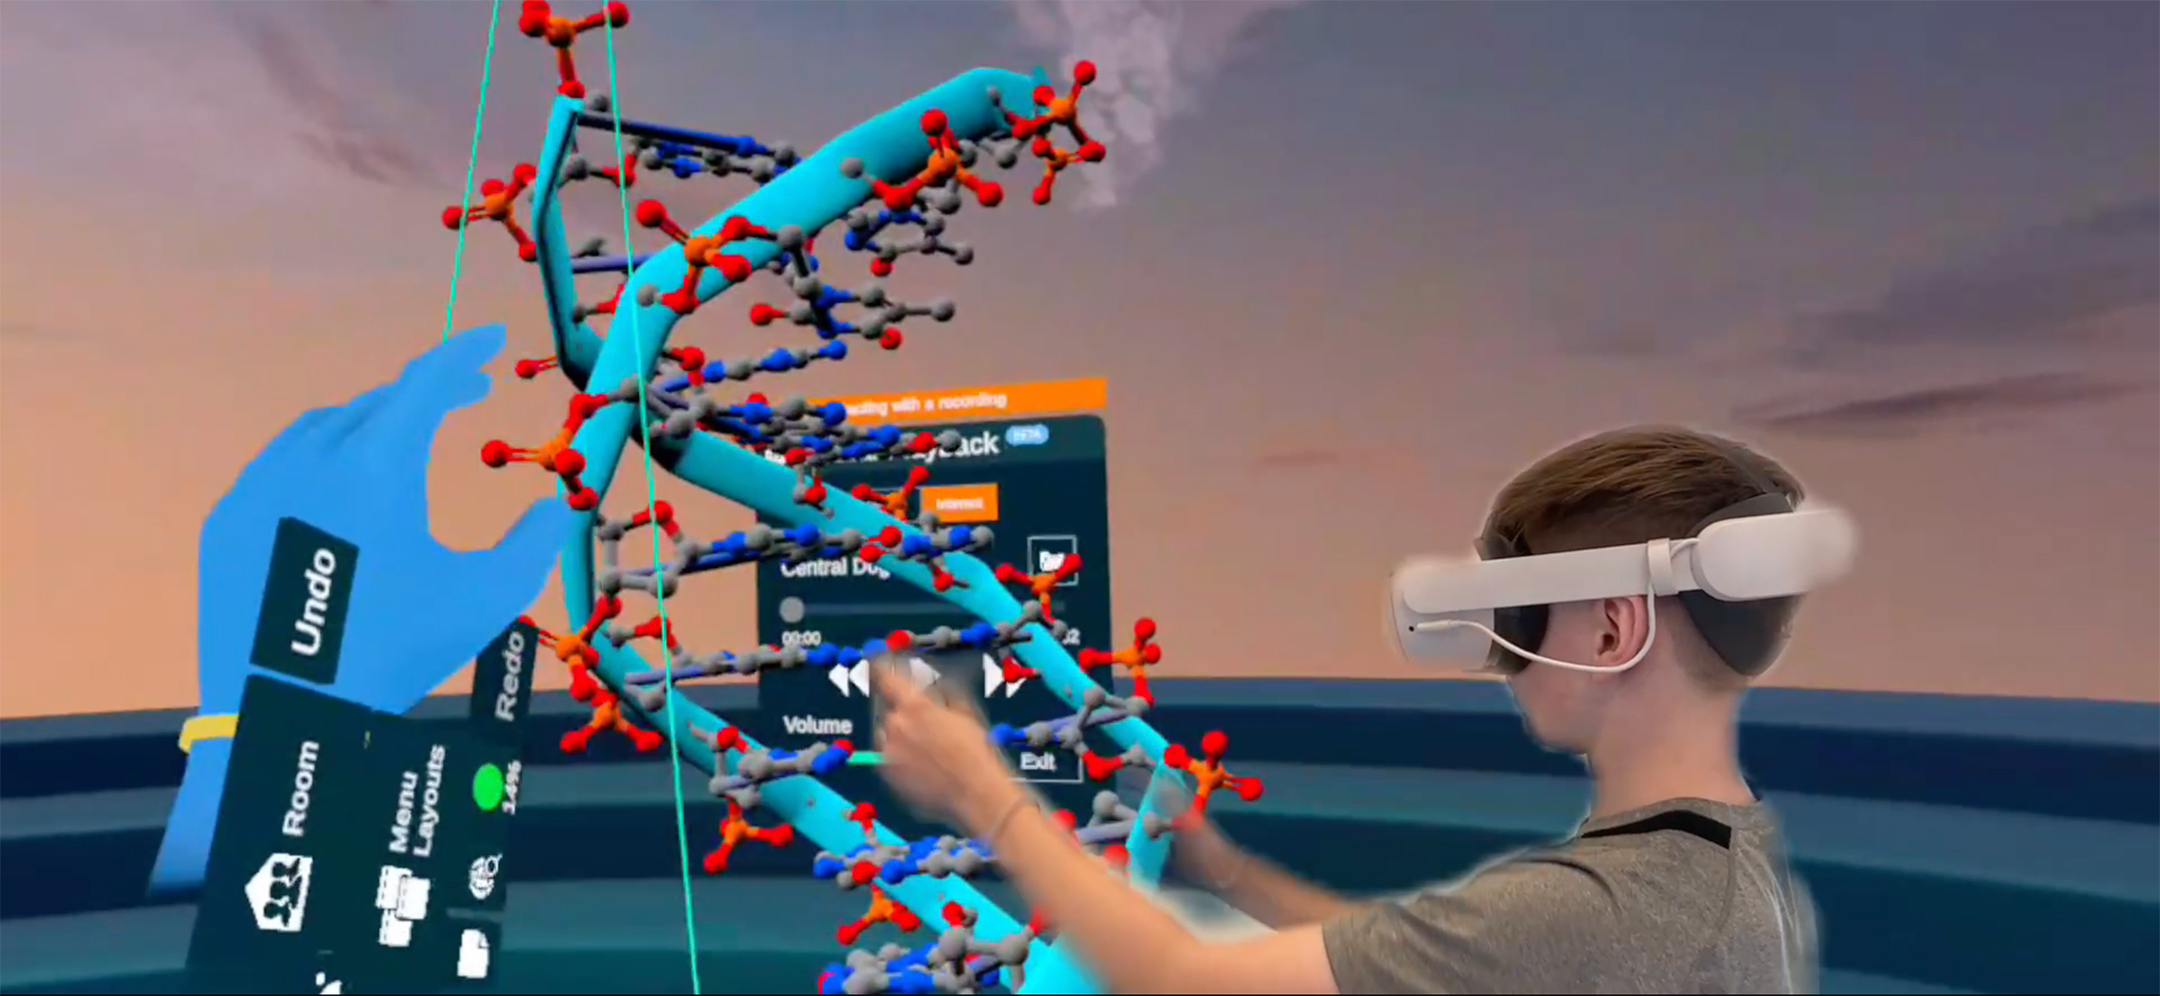 Screenshot from a video showing an elementary school student wearing a VR headset manipulating a DNA double helix in a virtual environment